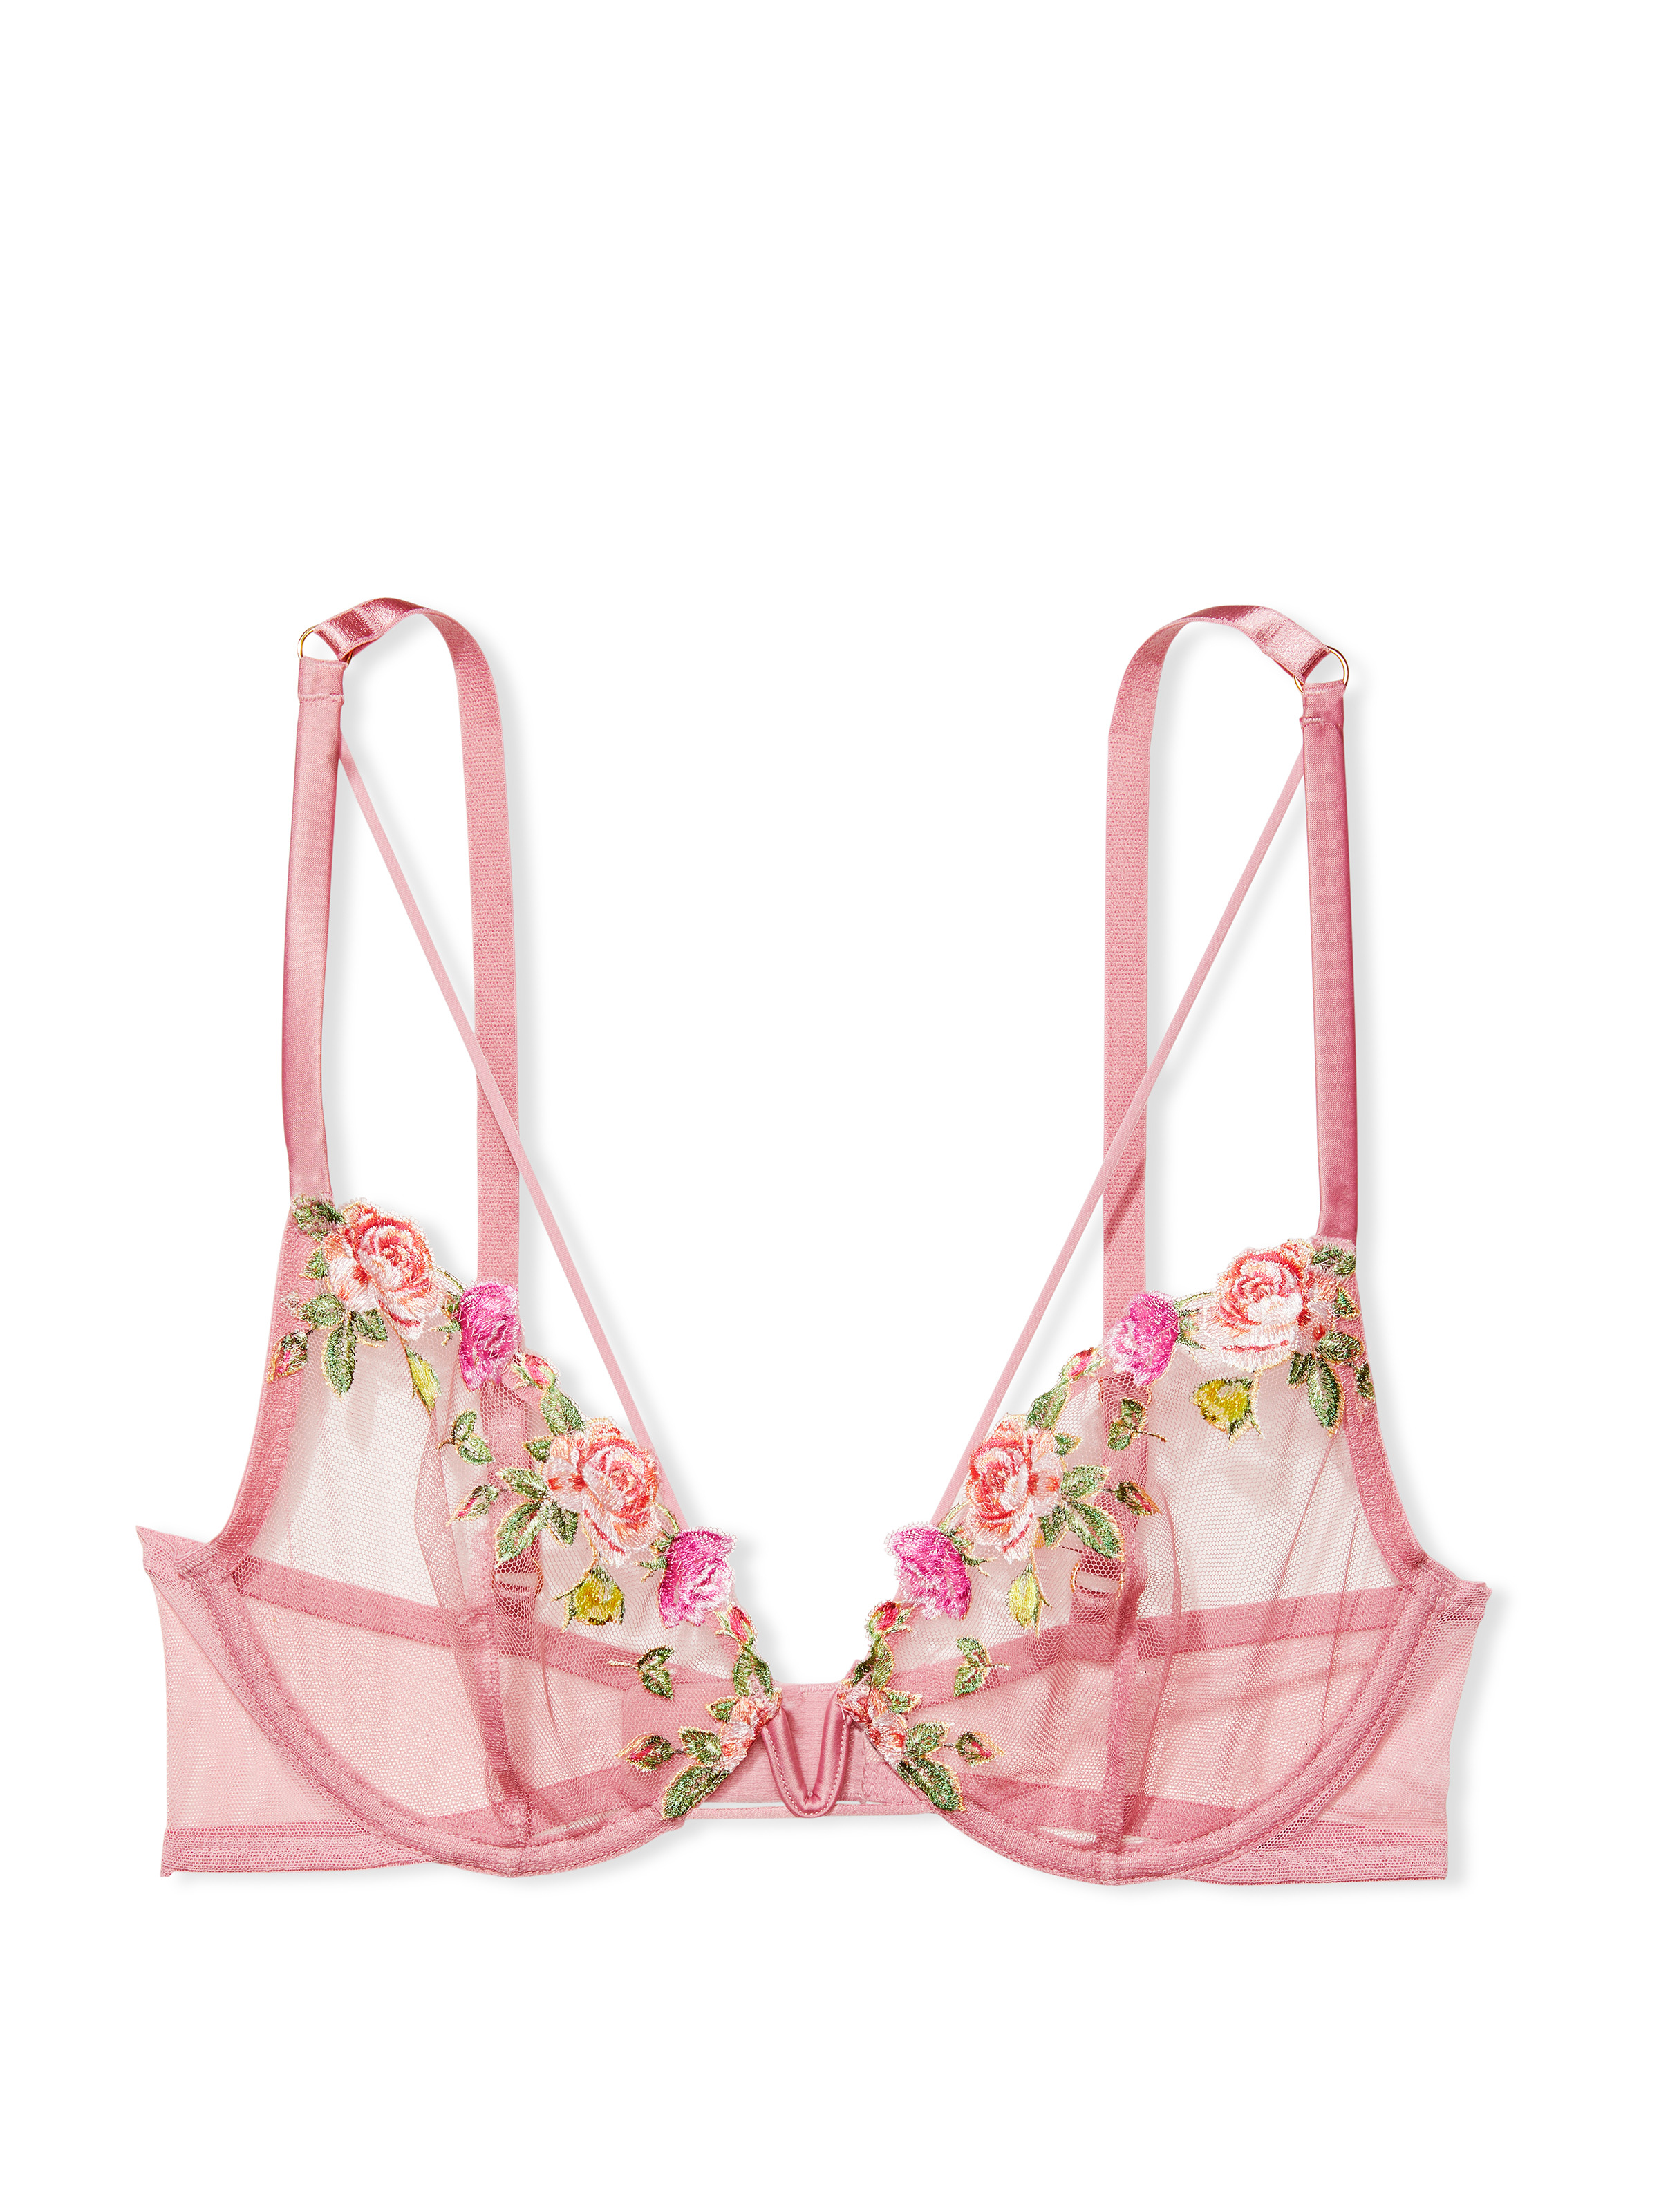 Victoria's Secret Luxe Very Sexy Unlined Rose Embroidered Demi Bra set rose  pink